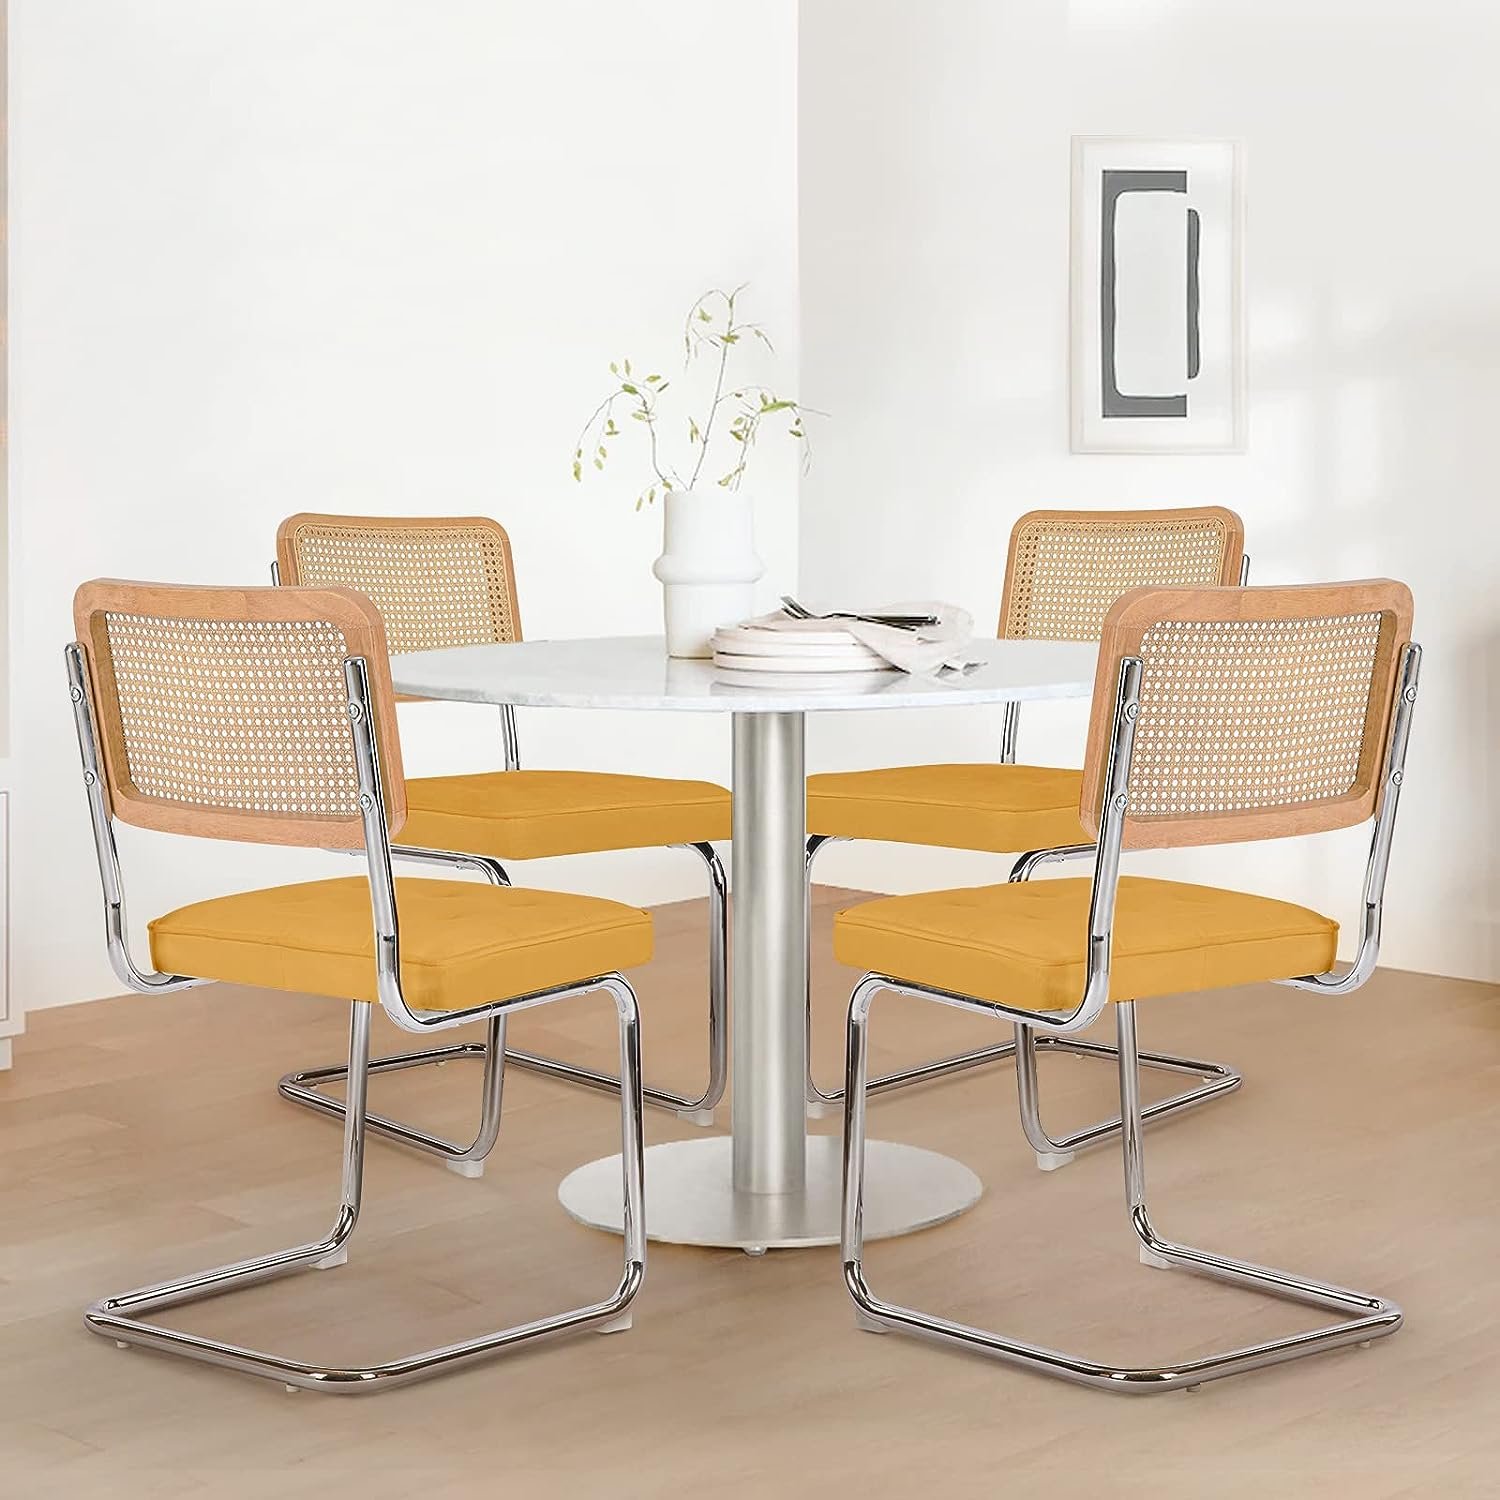 COLAMY Mid Century Modern Dining Chairs Set of 4